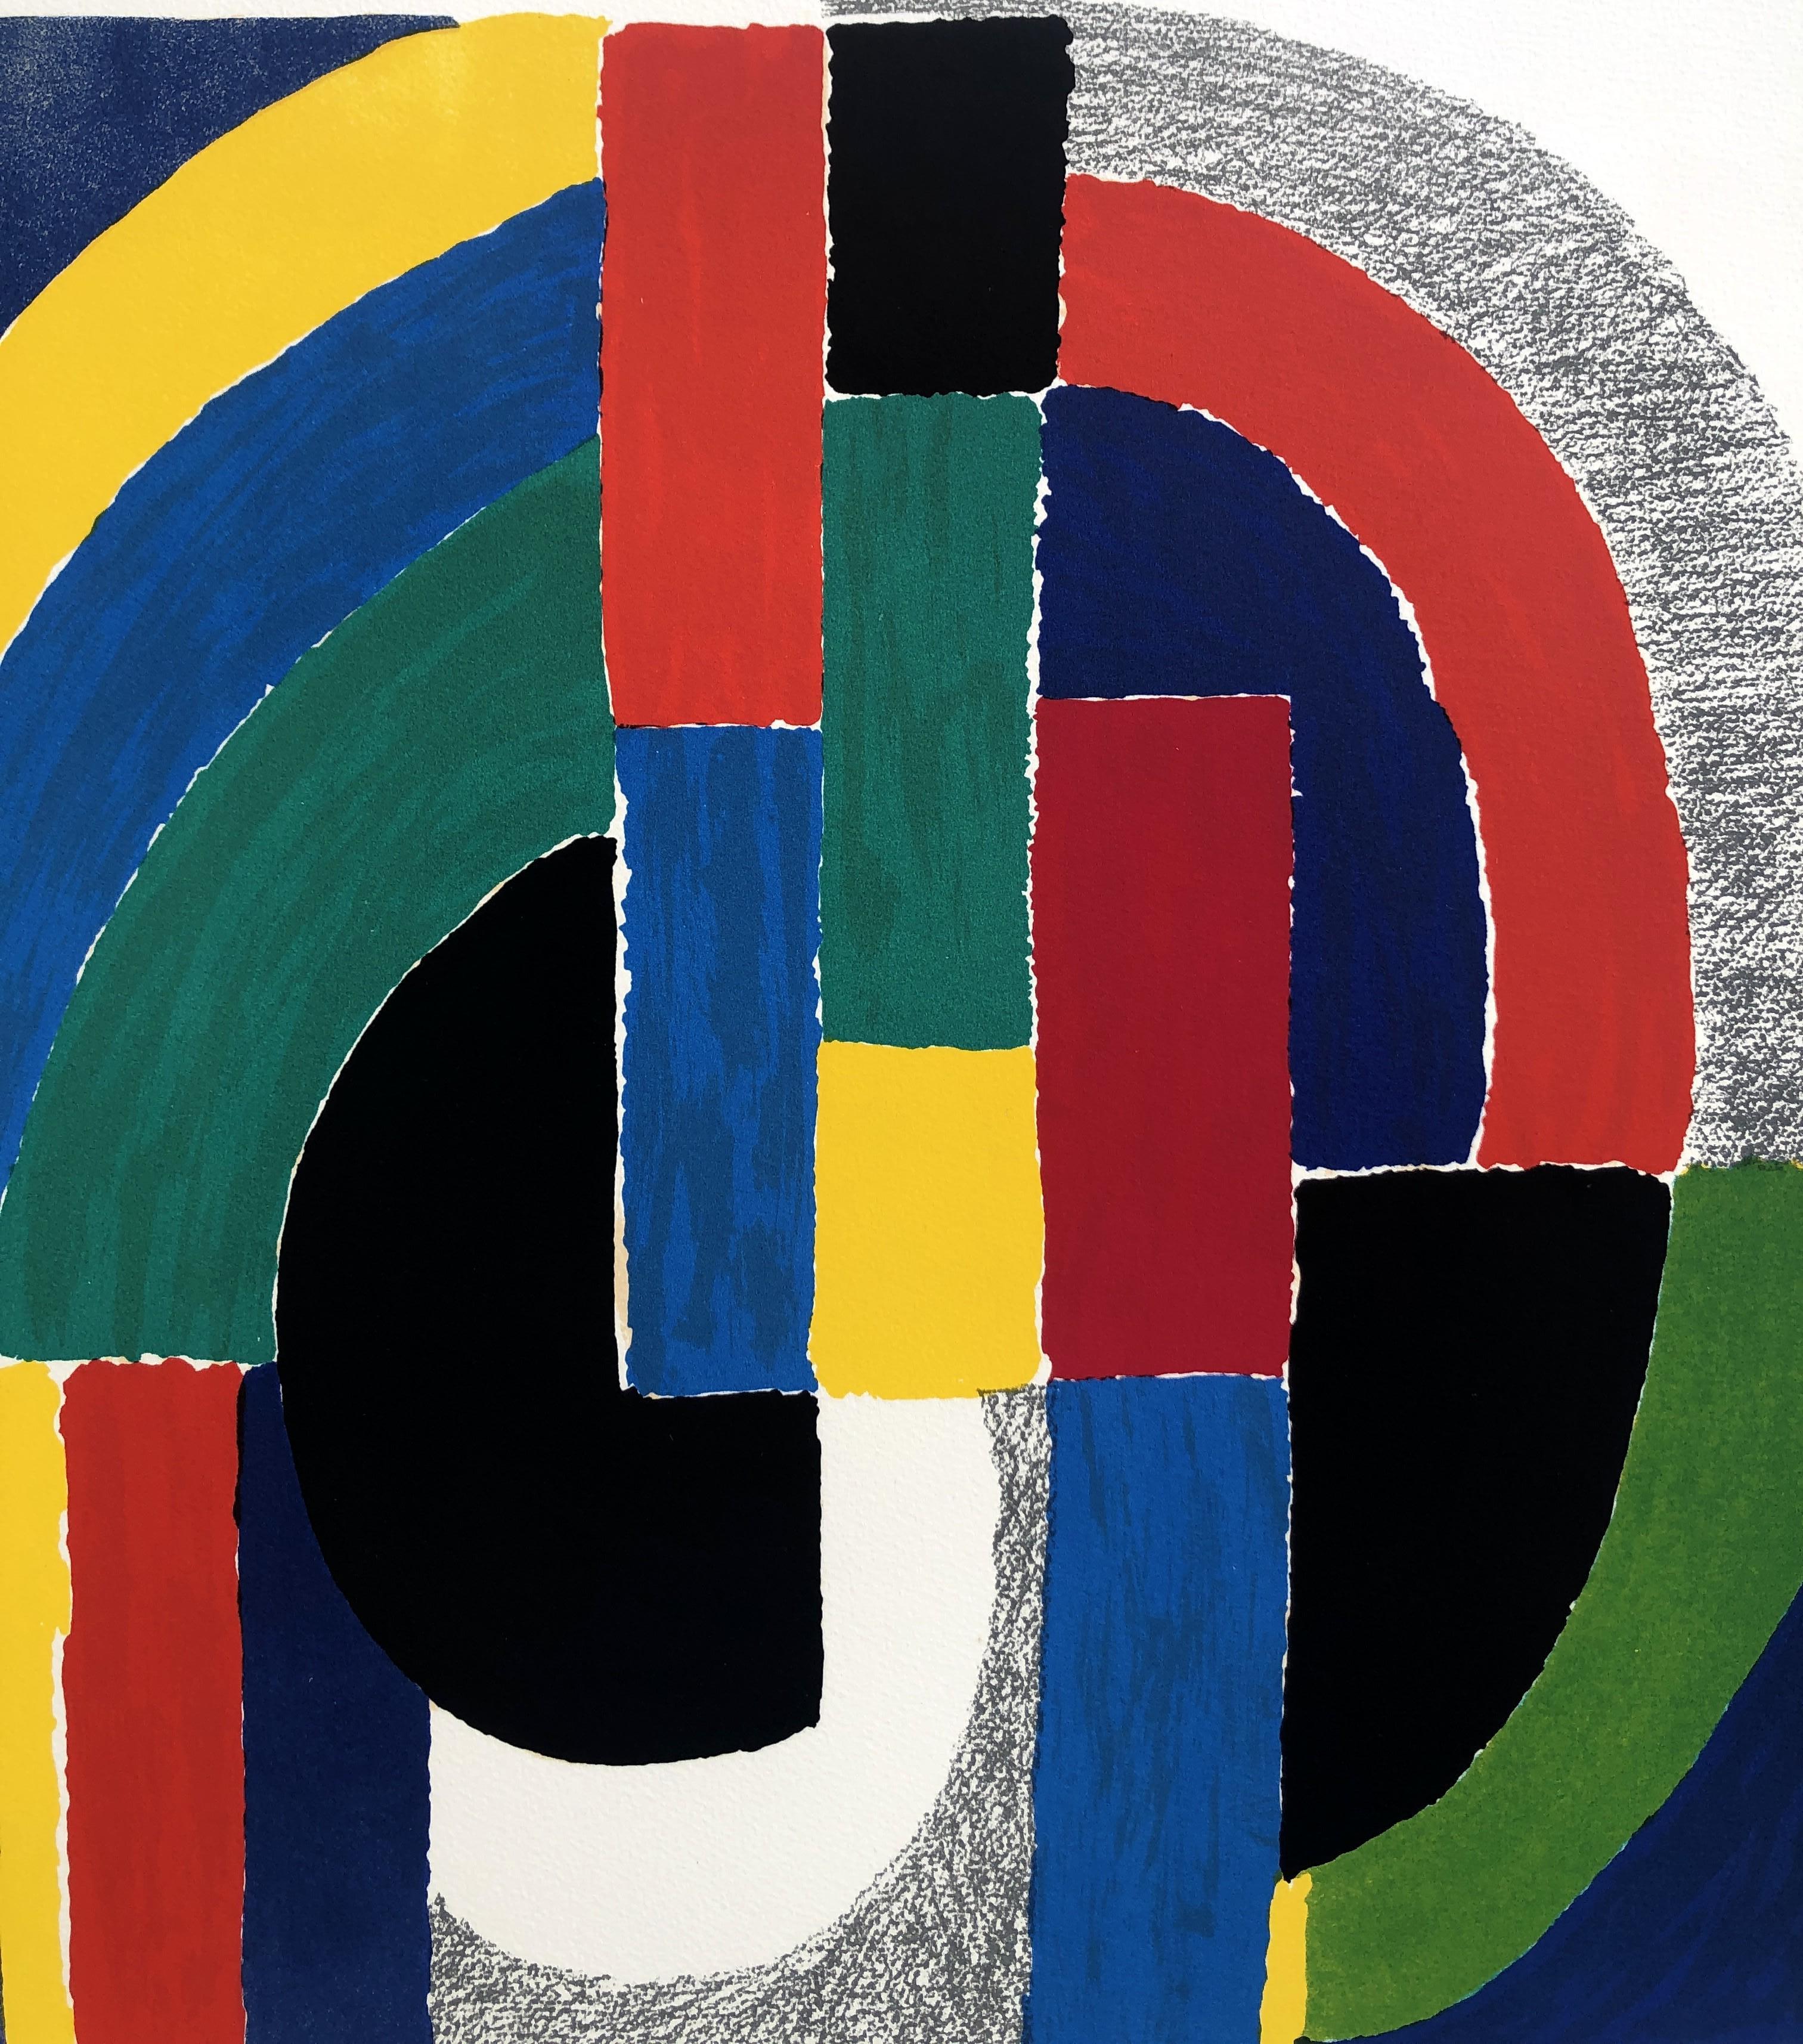 Sonia Delaunay
Geometric Composition, 1975

Original lithograph
Handsigned in pencil 
Numbered /XXX HC copies (Hors Commerce), aside the edition of 99 copies.
On Arches vellum 75 x 54 cm (c. 29,5 x 21,2 inch)

Very good condition